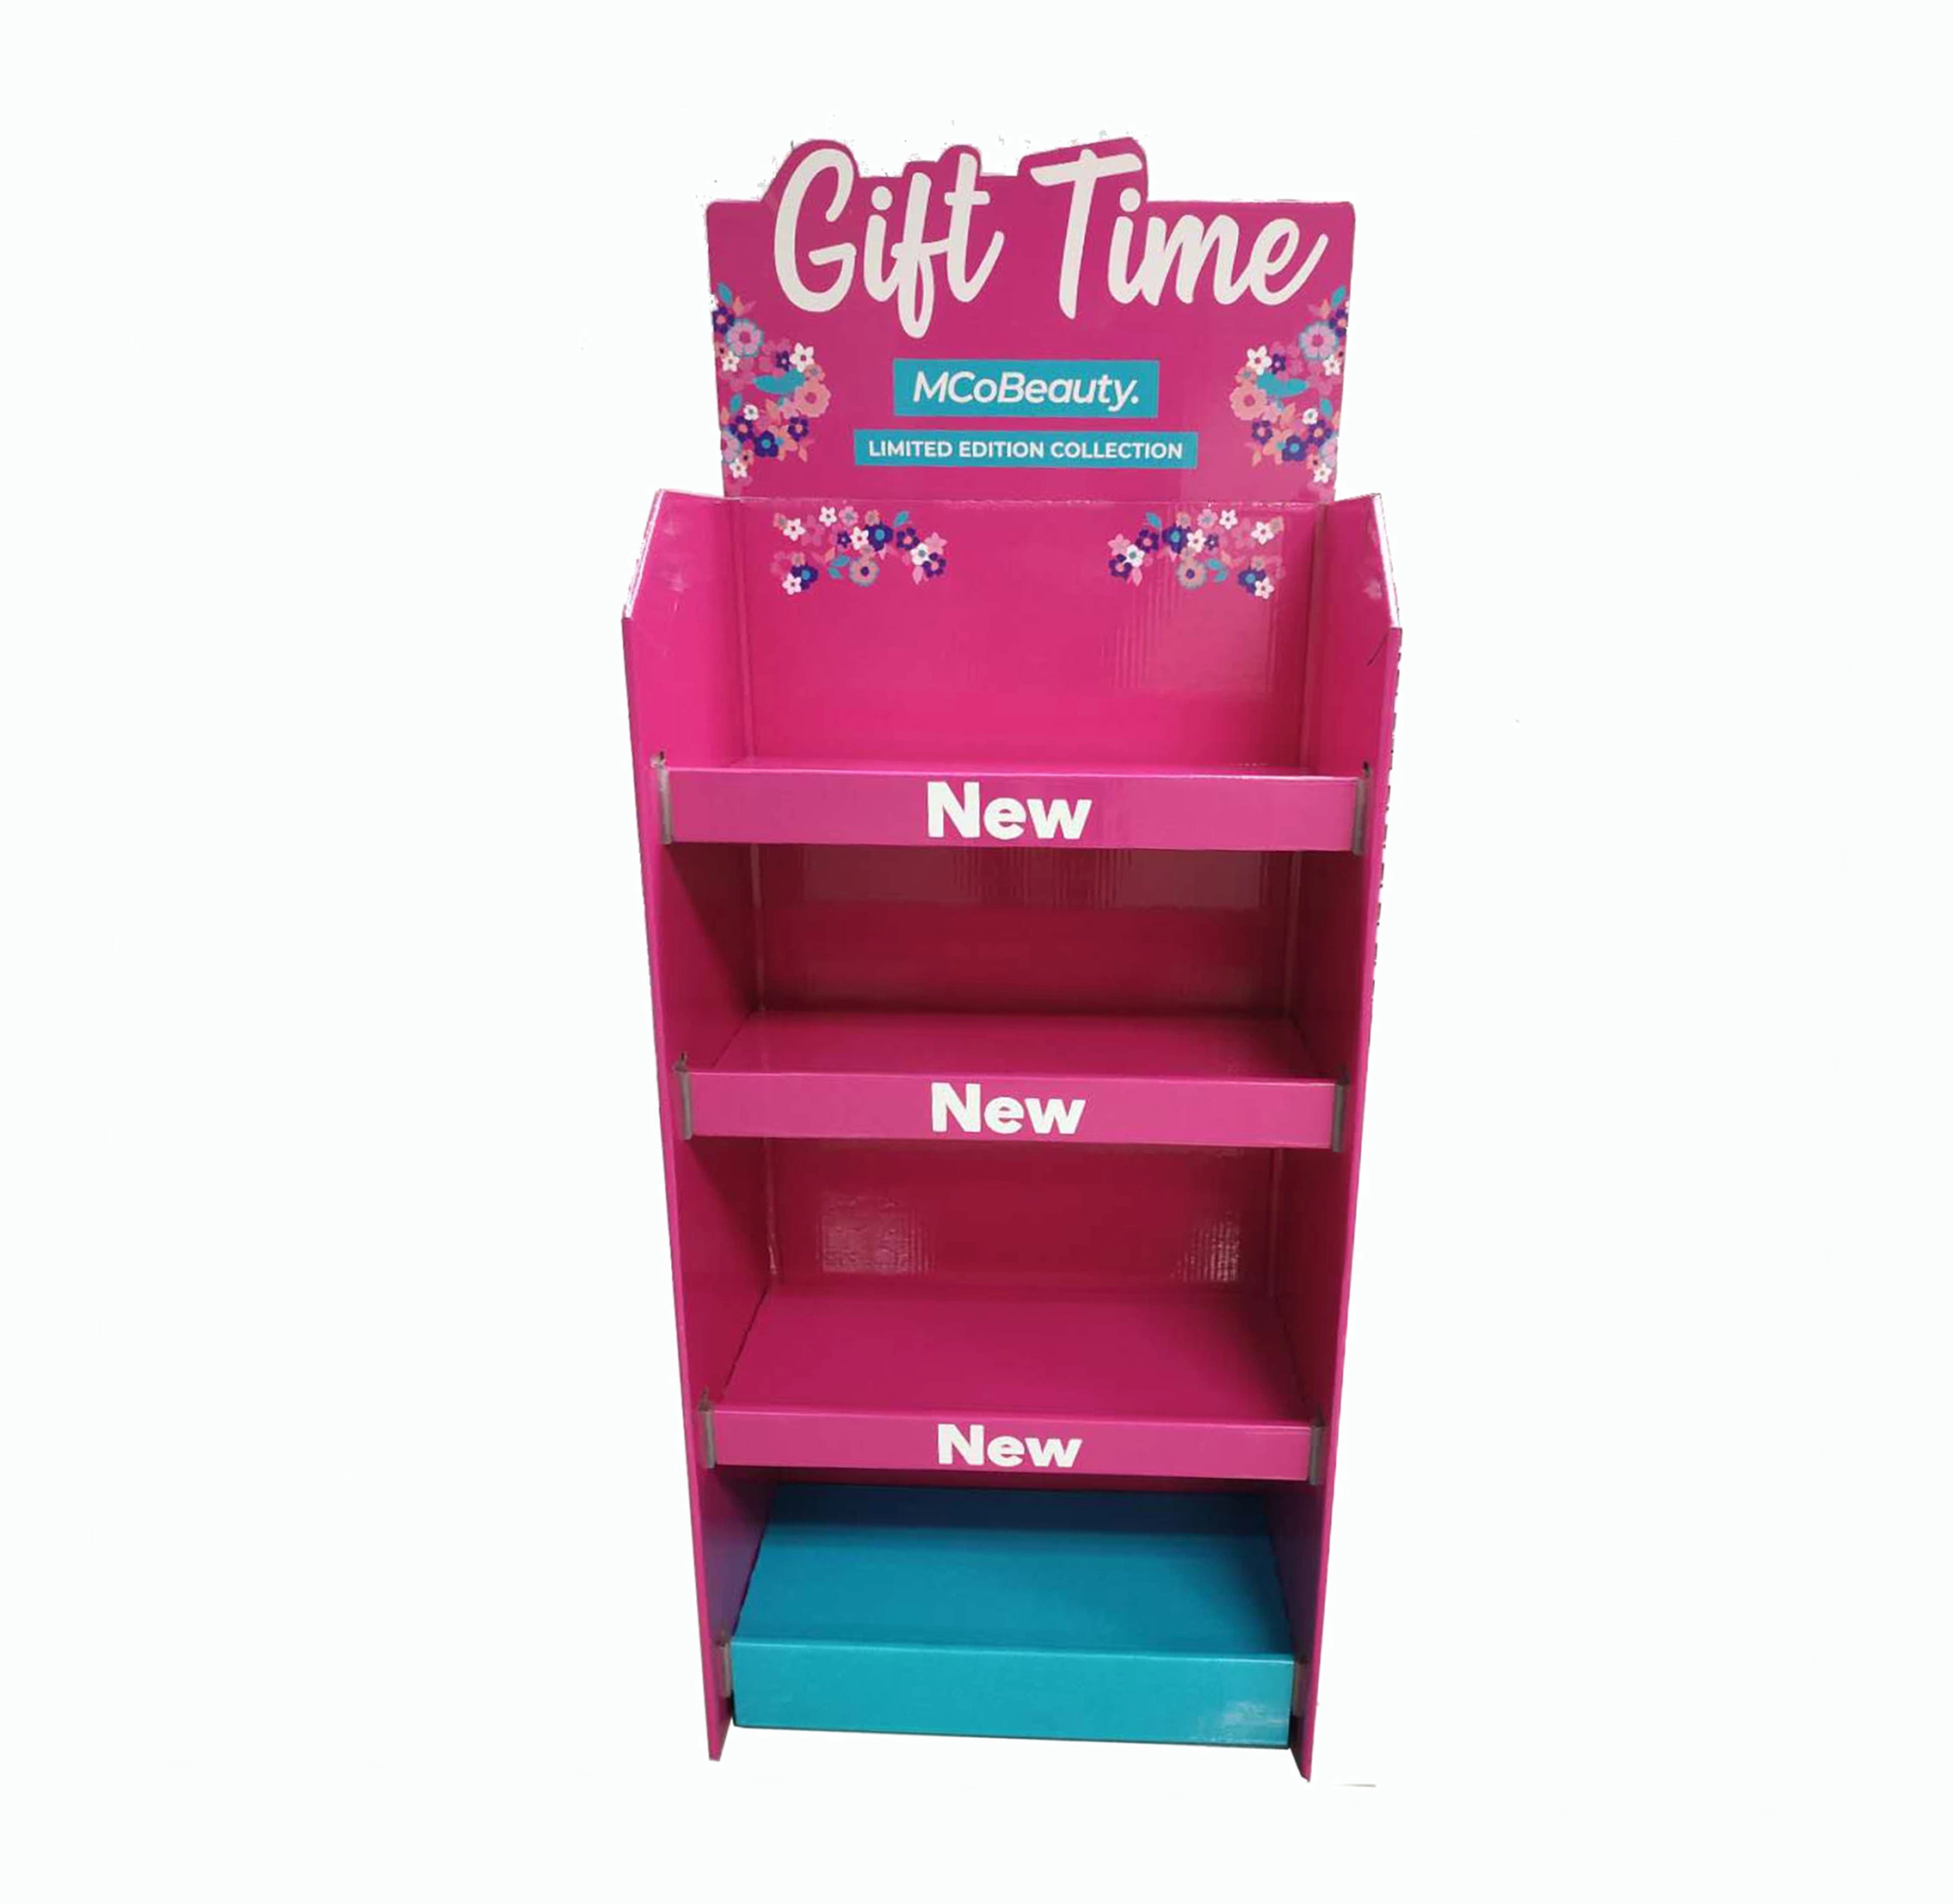 Festival Gift Cardboard Floor Display Rack for Advertising and Promotion and Display